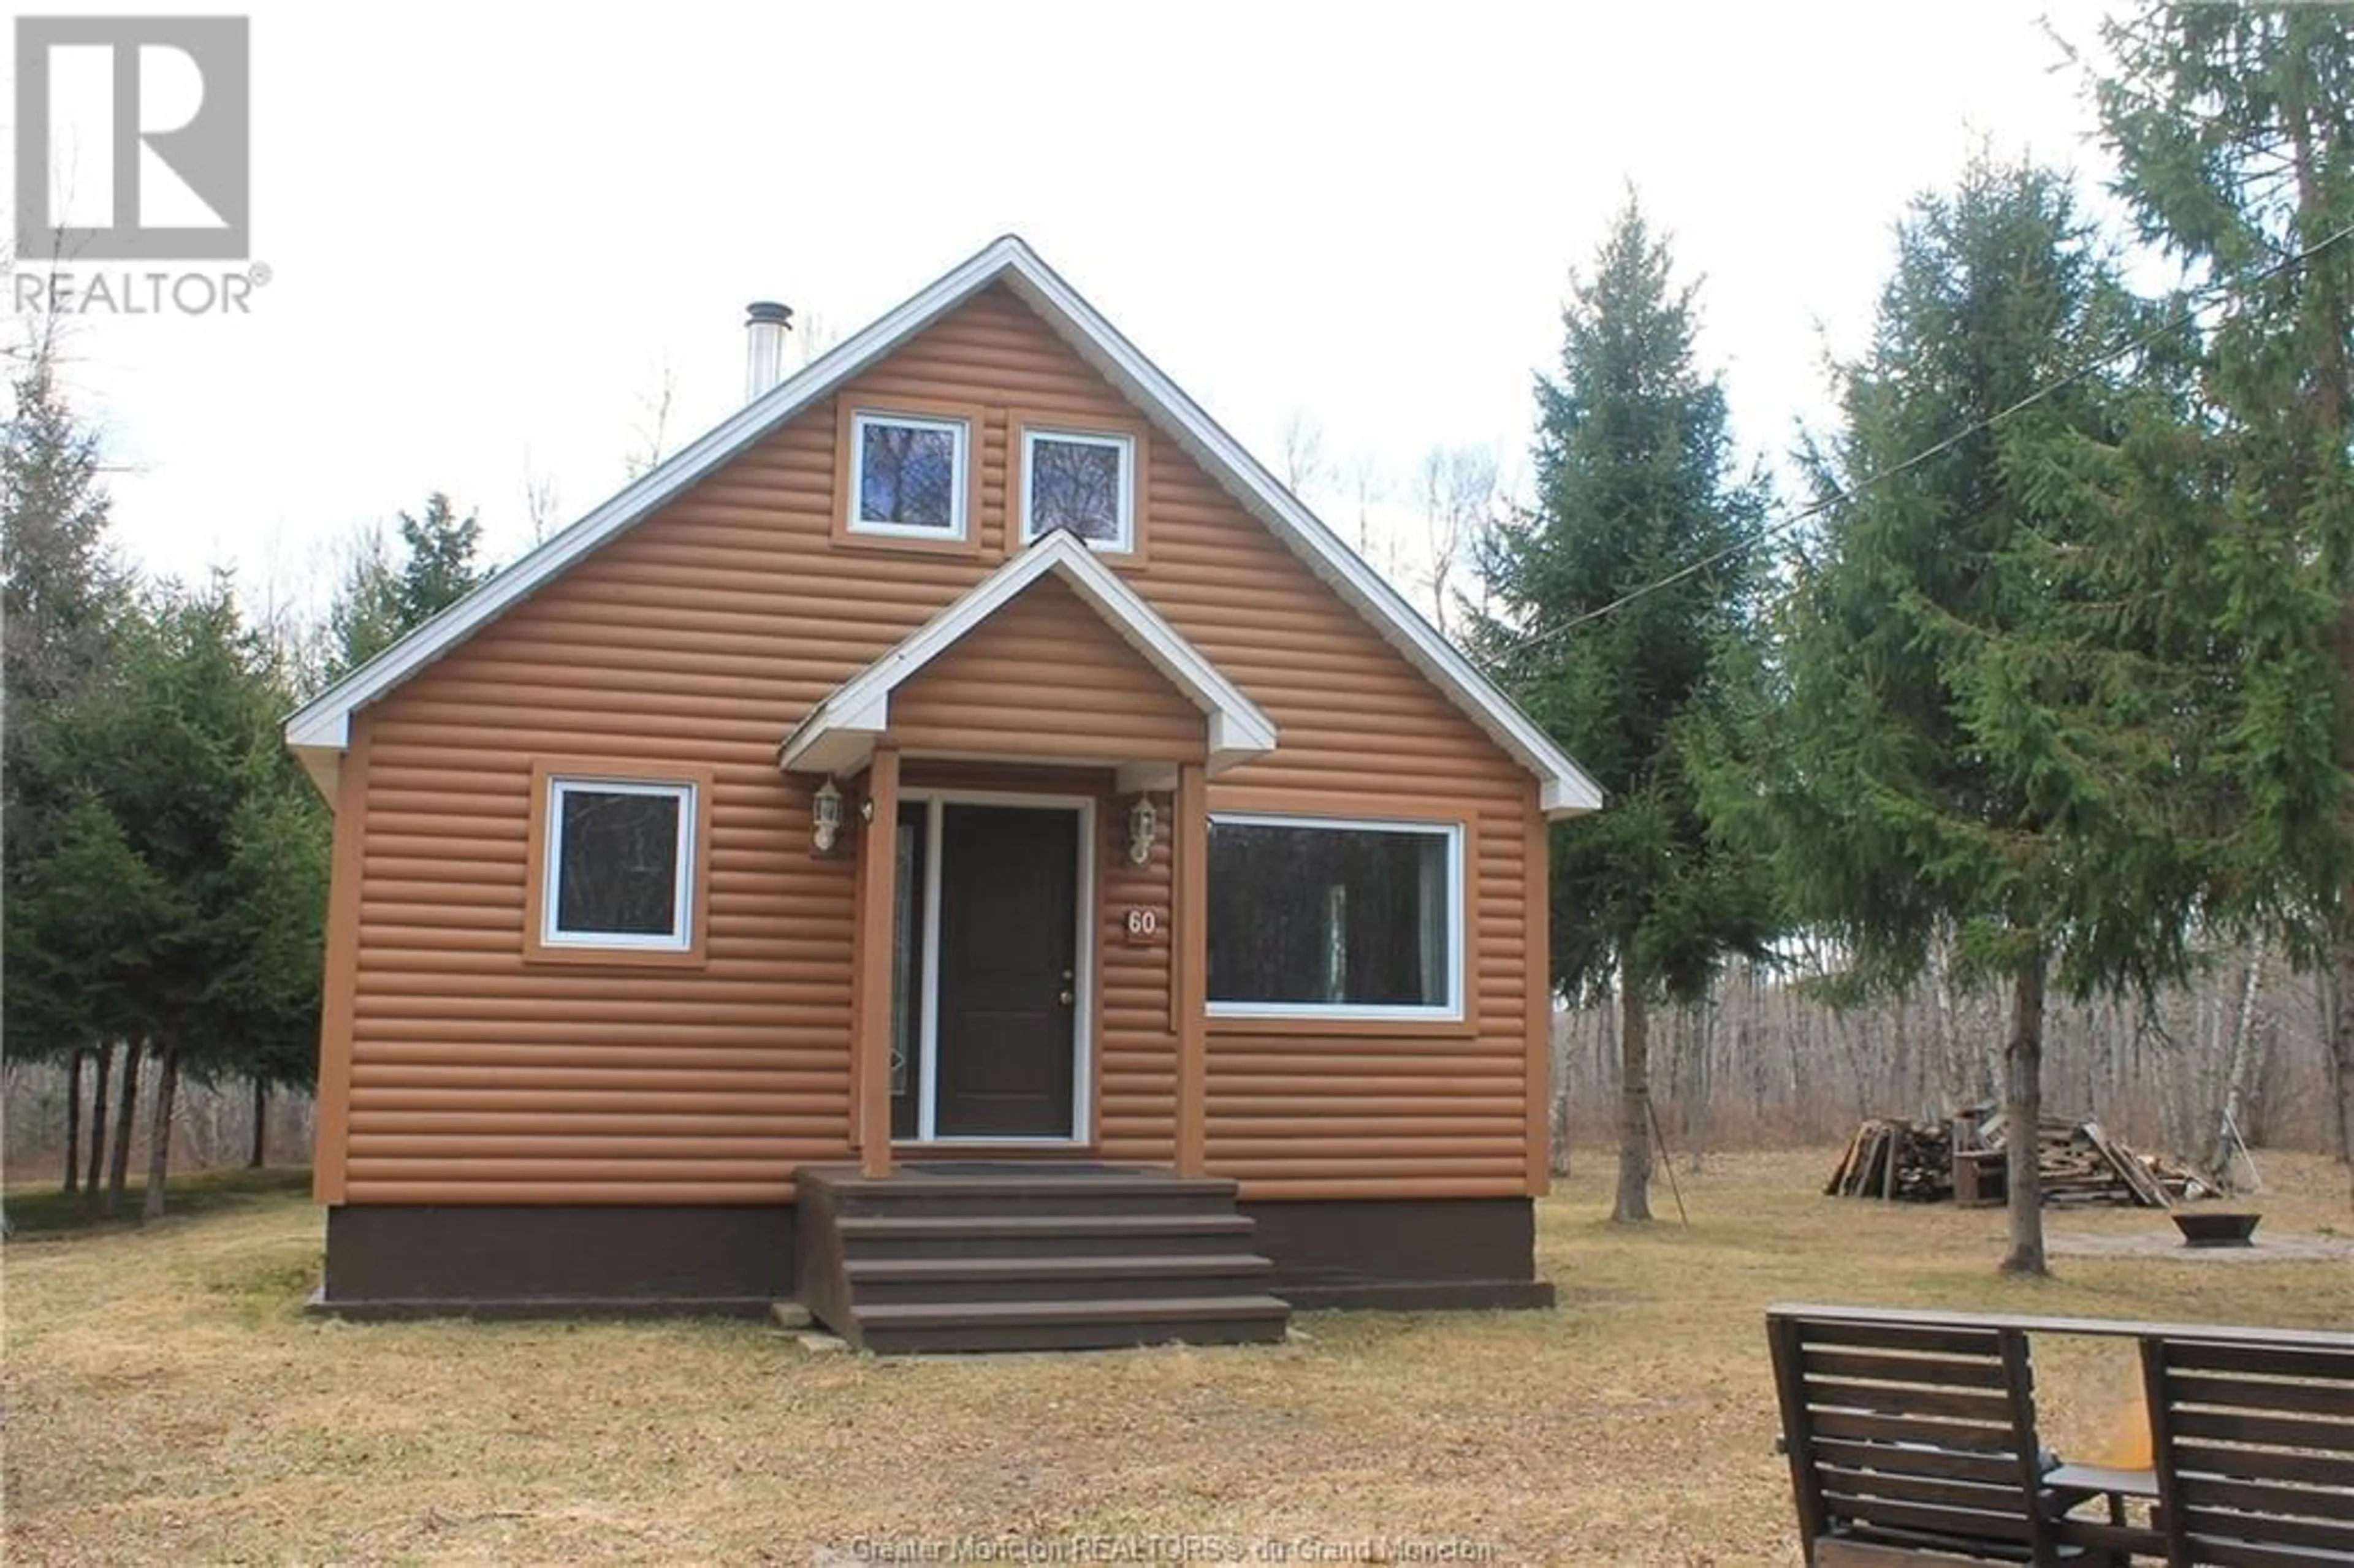 Cottage for 60 Kent LANE, Canaan Forks New Brunswick E4Z0H1